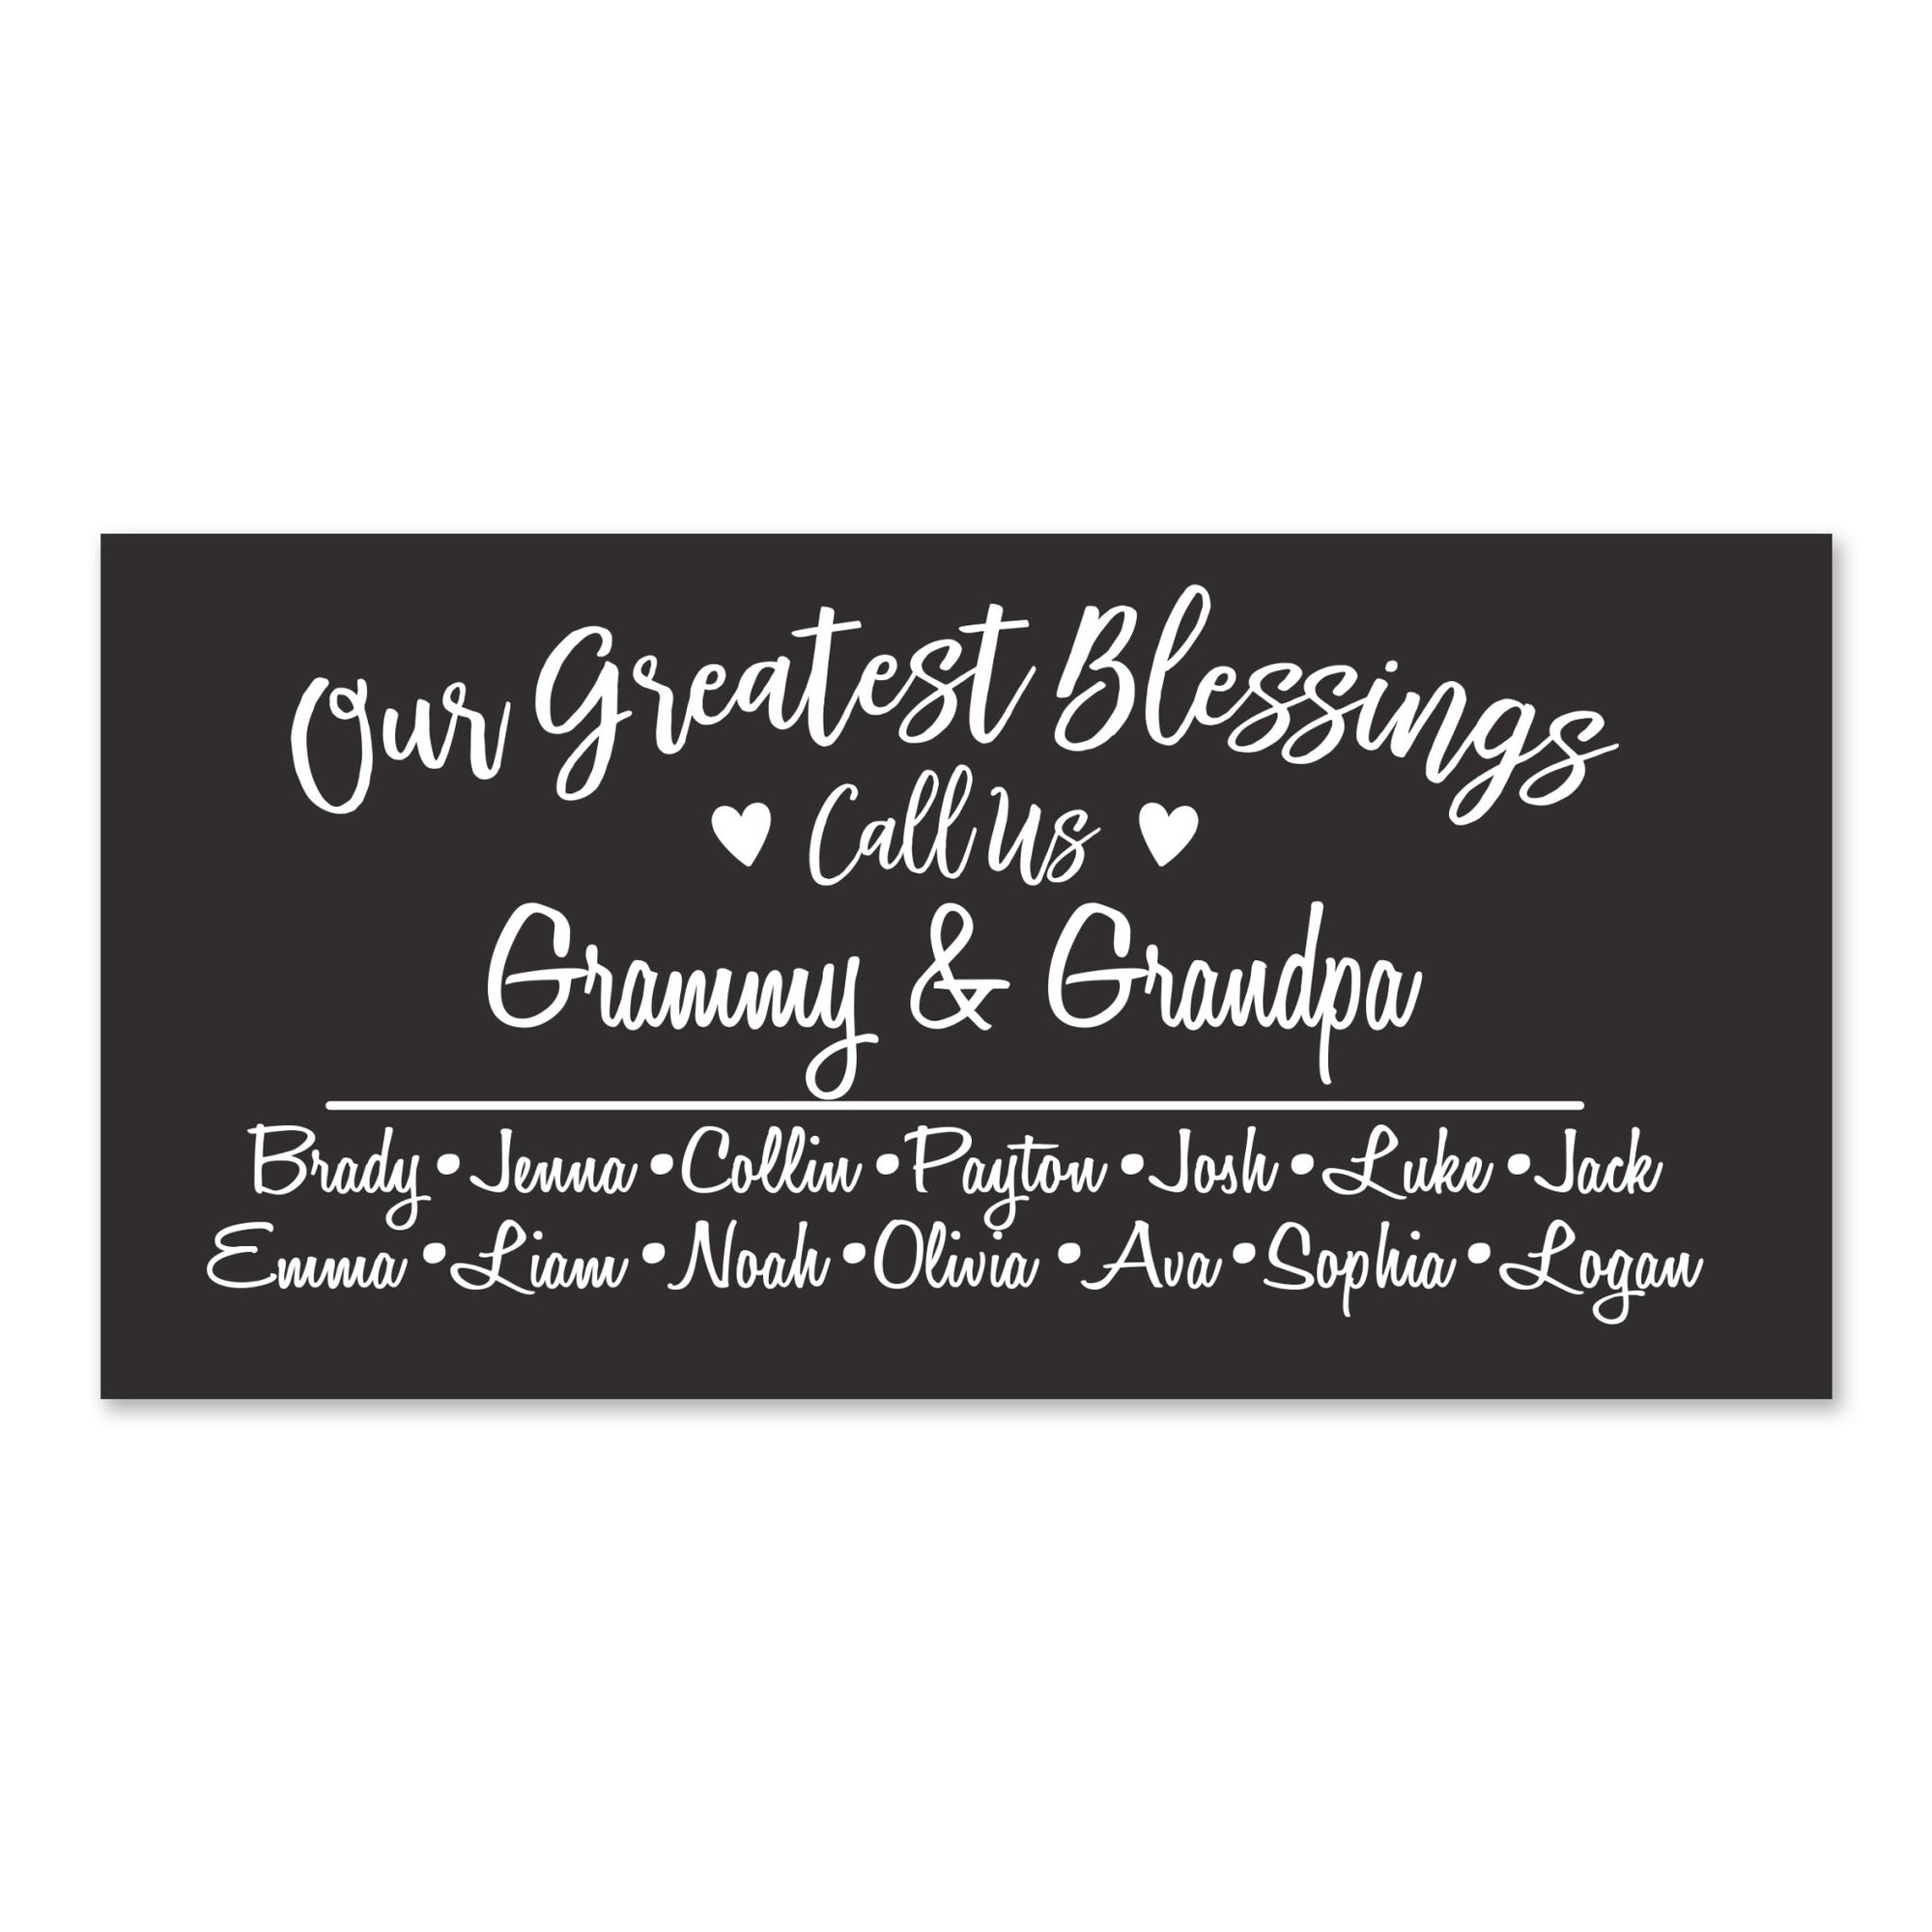 Personalized Grandparents Plaque Greatest Blessings - Grammy & Grandpa - LifeSong Milestones